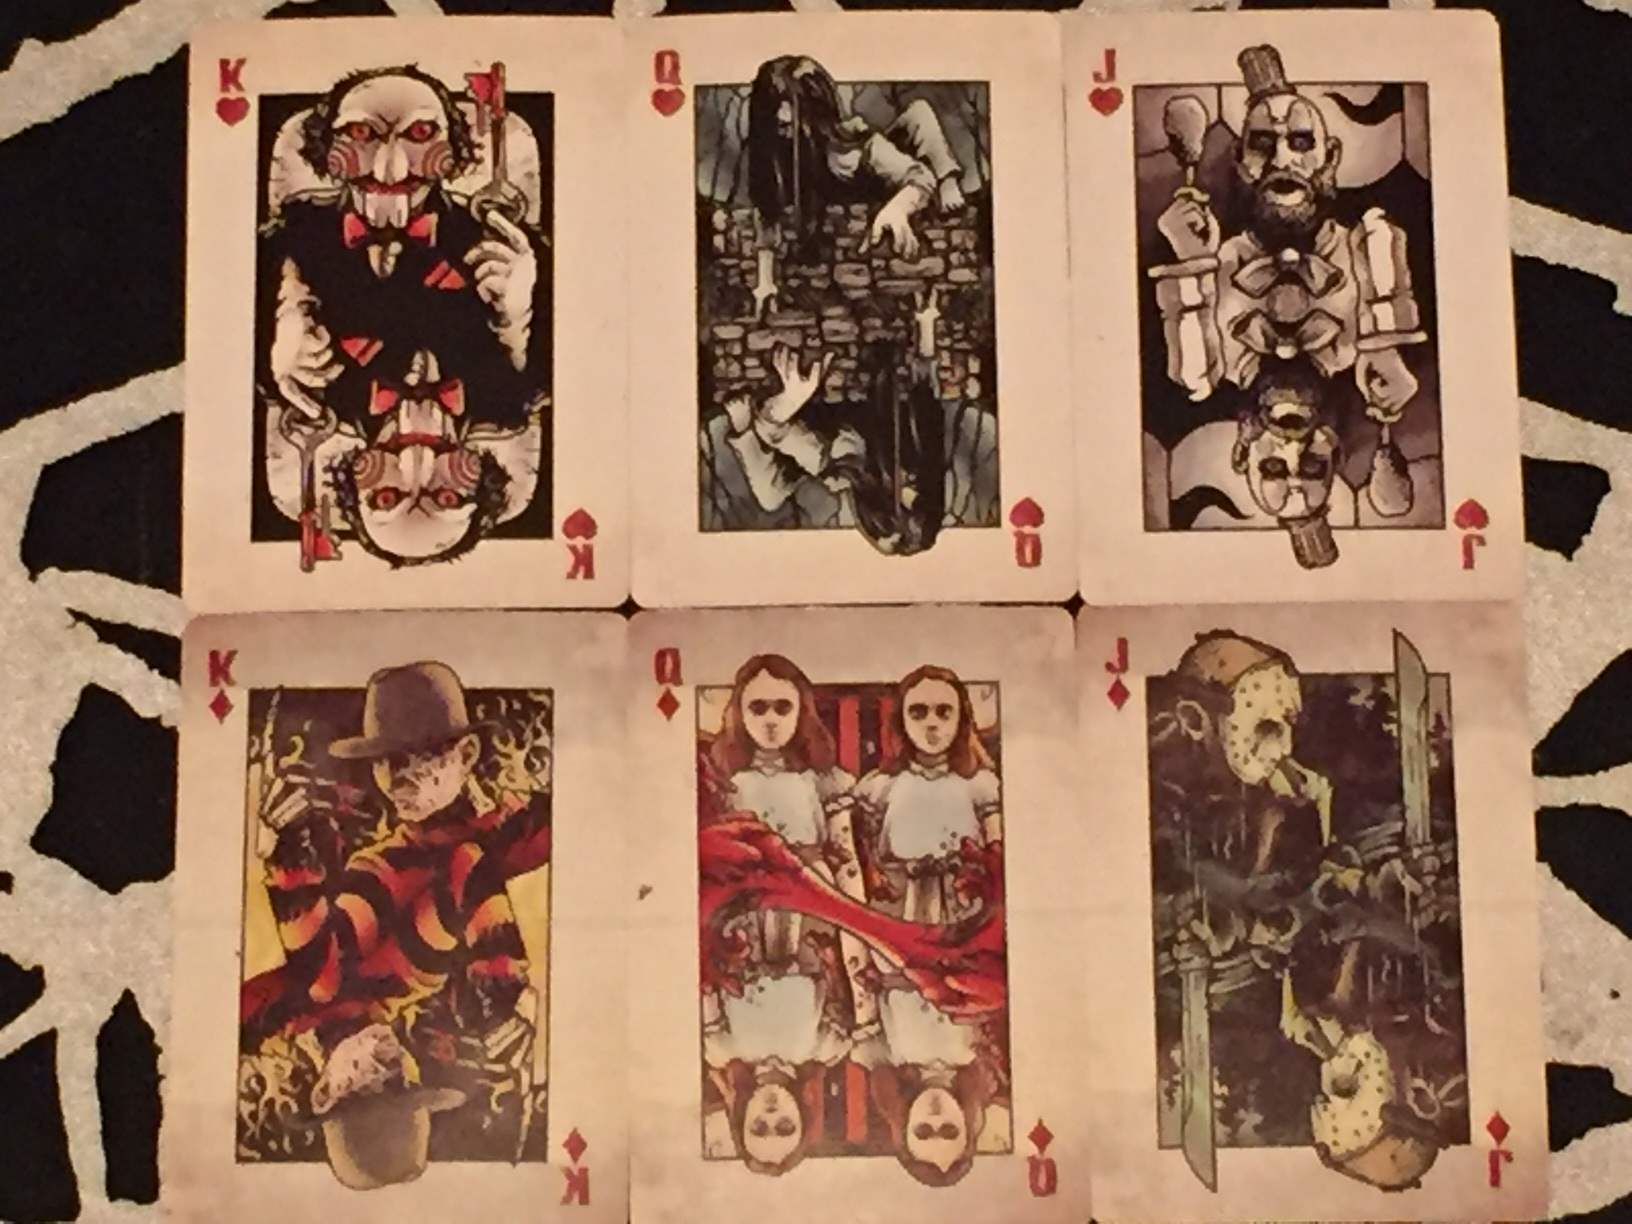 Two sets of face cards in the deck of playing cards included in February 2016's Horror Block